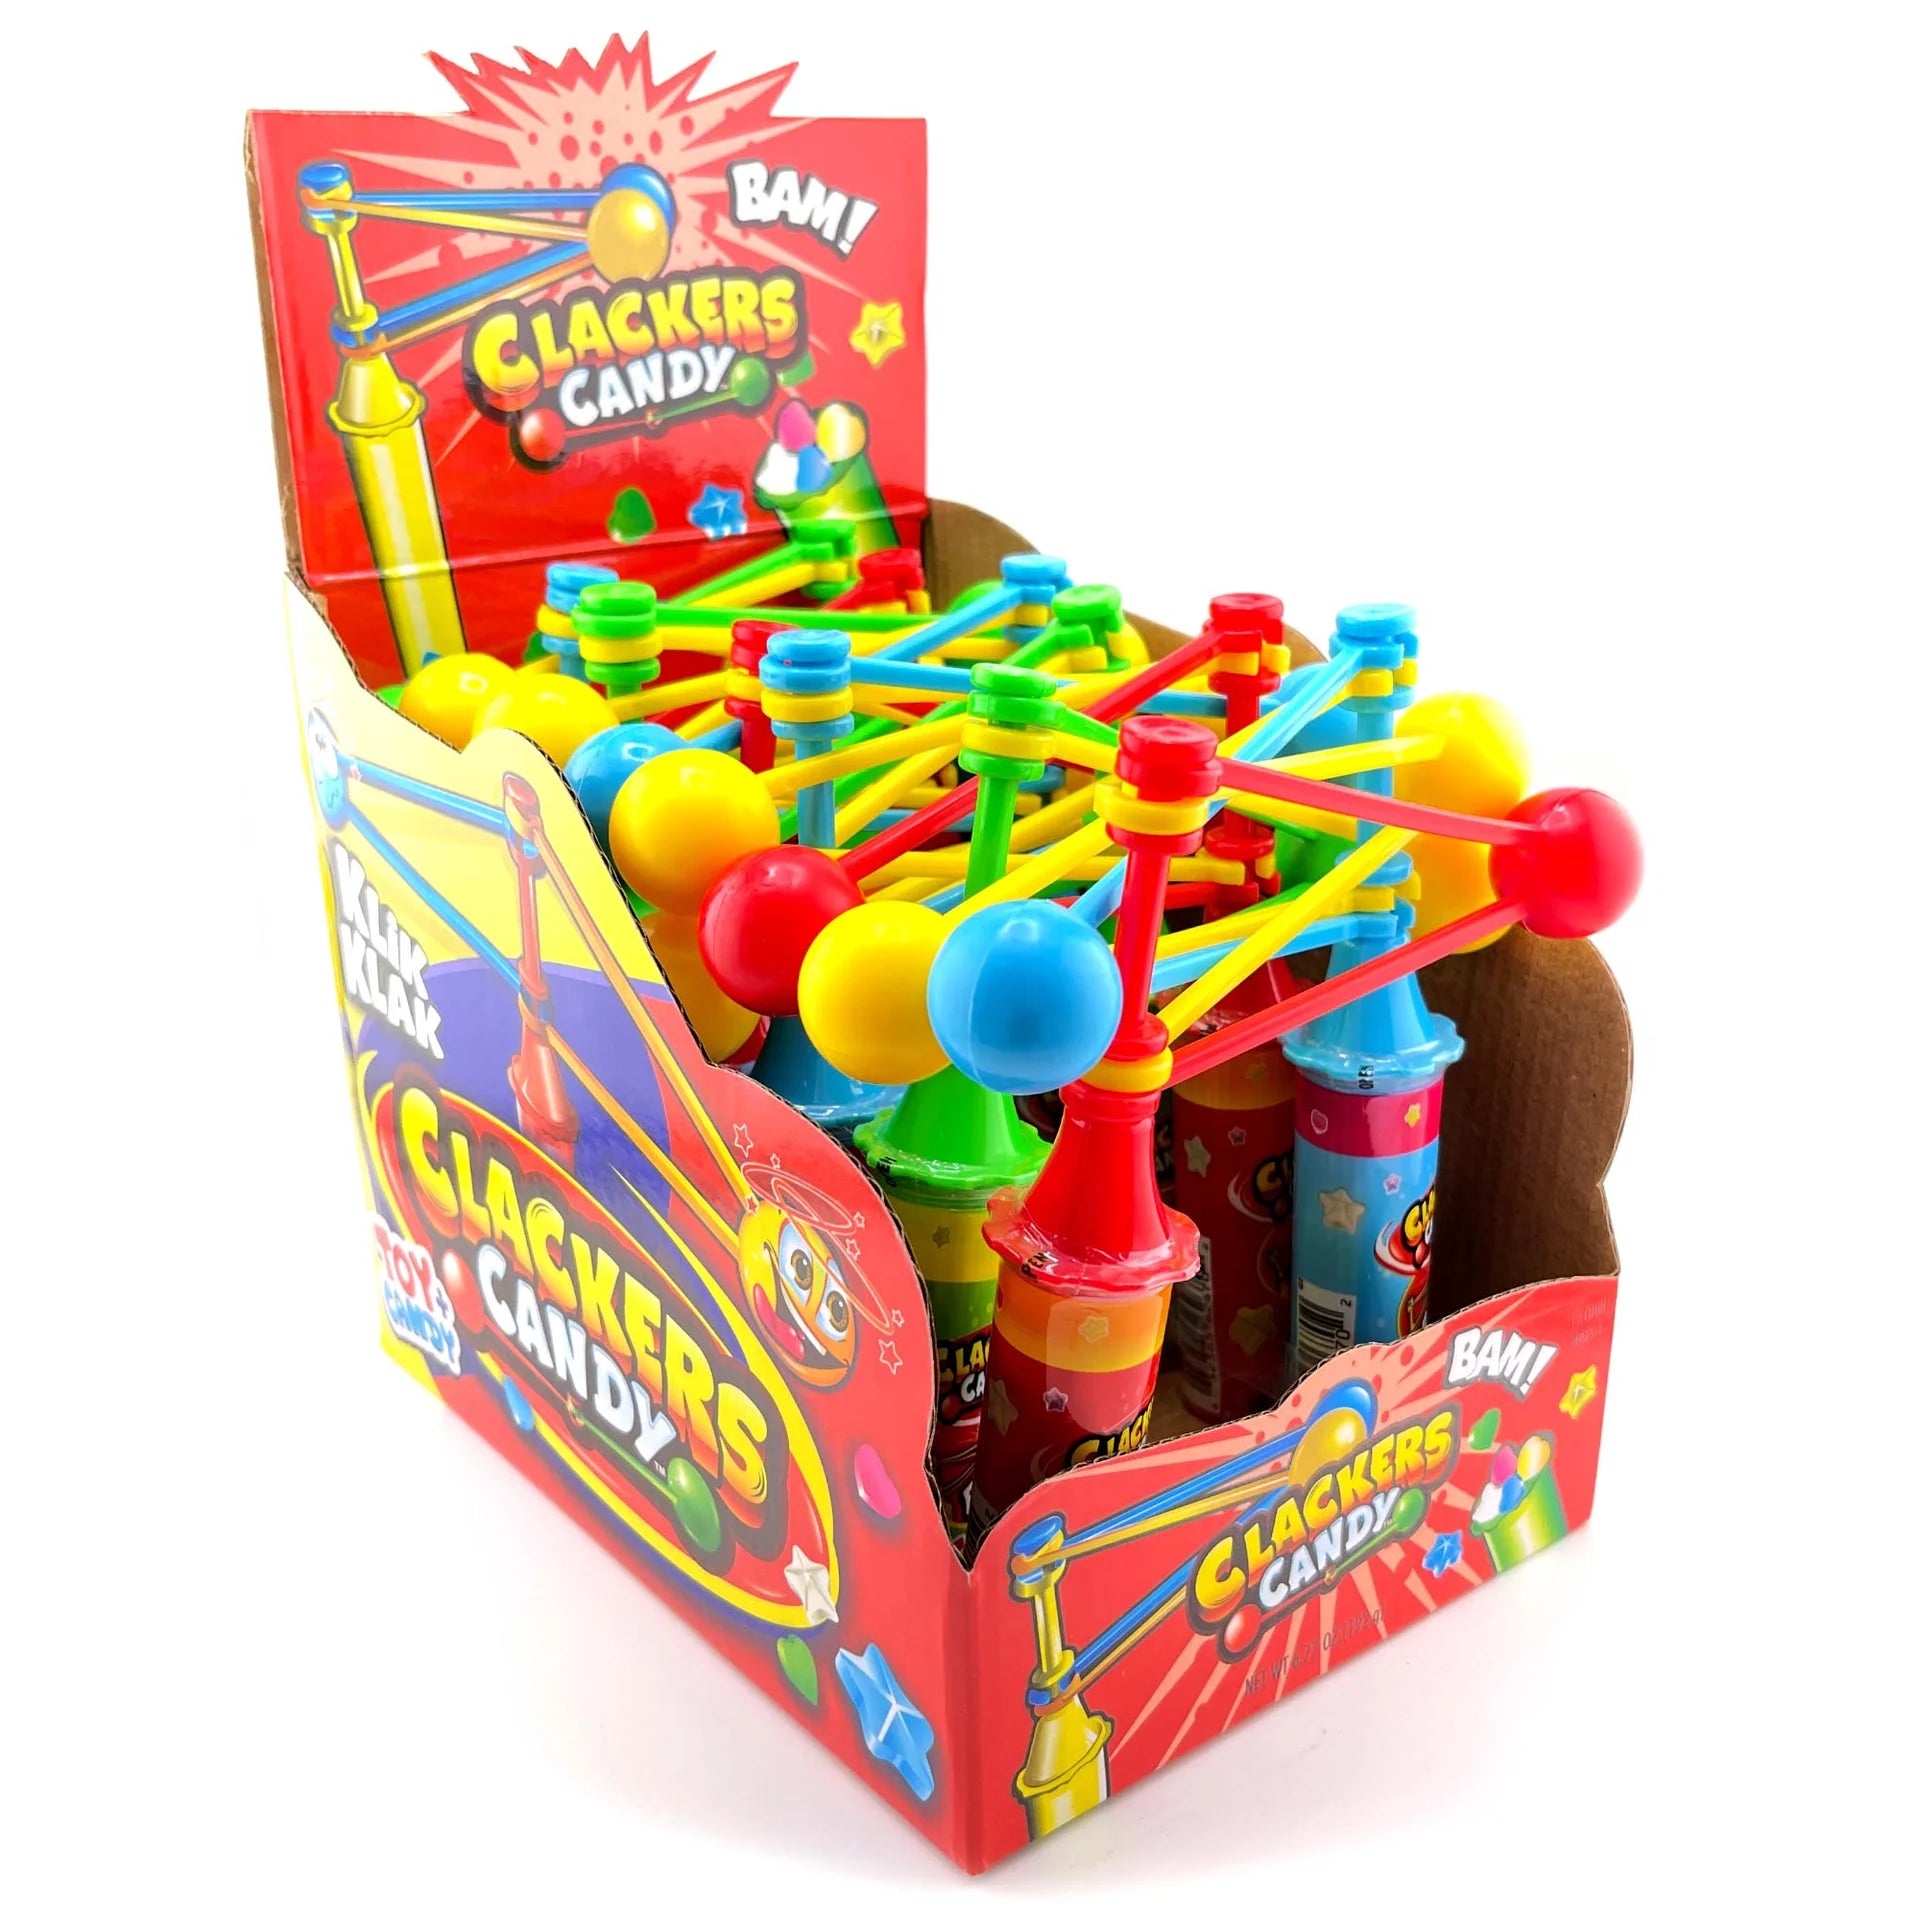 Clackers Candy